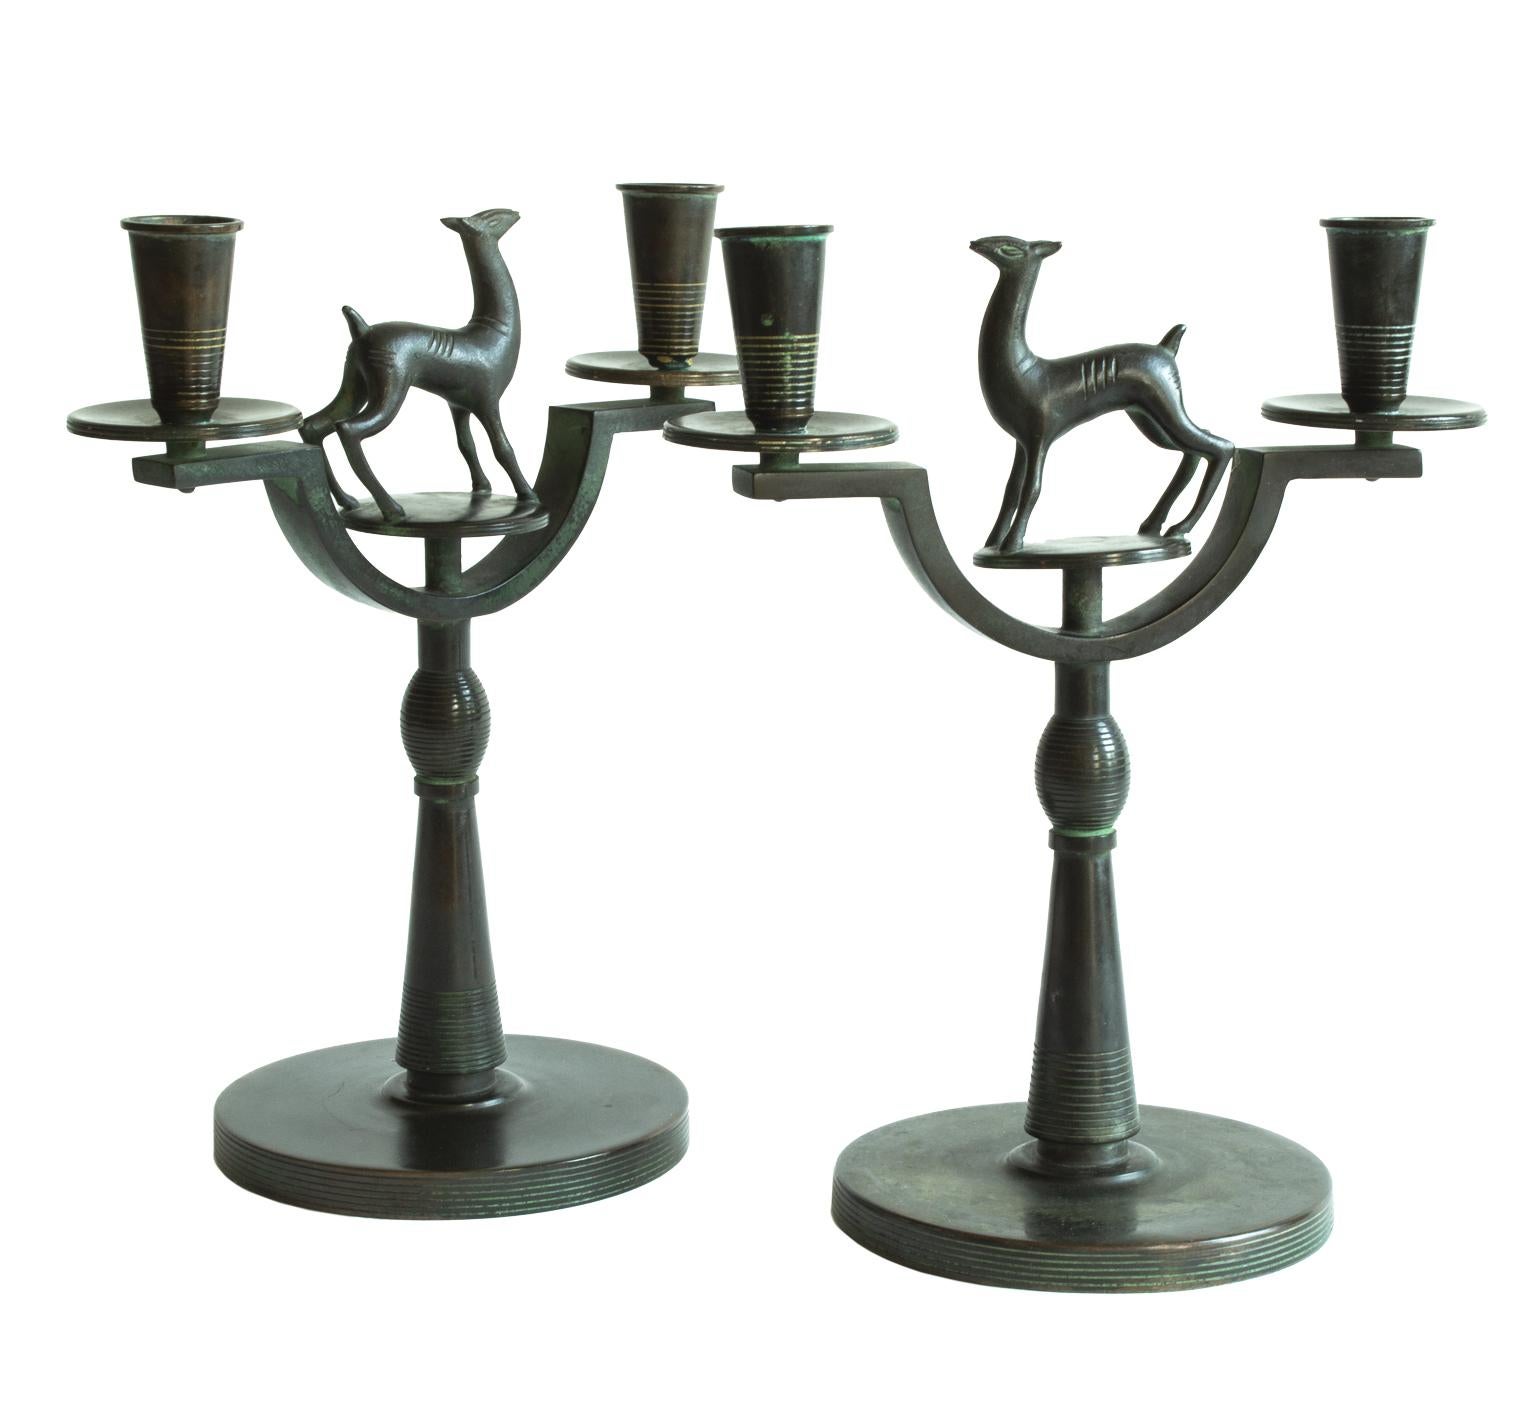 Very rare Art Deco pair of Swedish modern candelabras signed by Nils Fougstedt in Bronze. Probably made between 1920-1935.
Nils Fougsted had several assignments for Firma Svenskt Tenn and the owner Estrid Ericson. These candelabras are made for